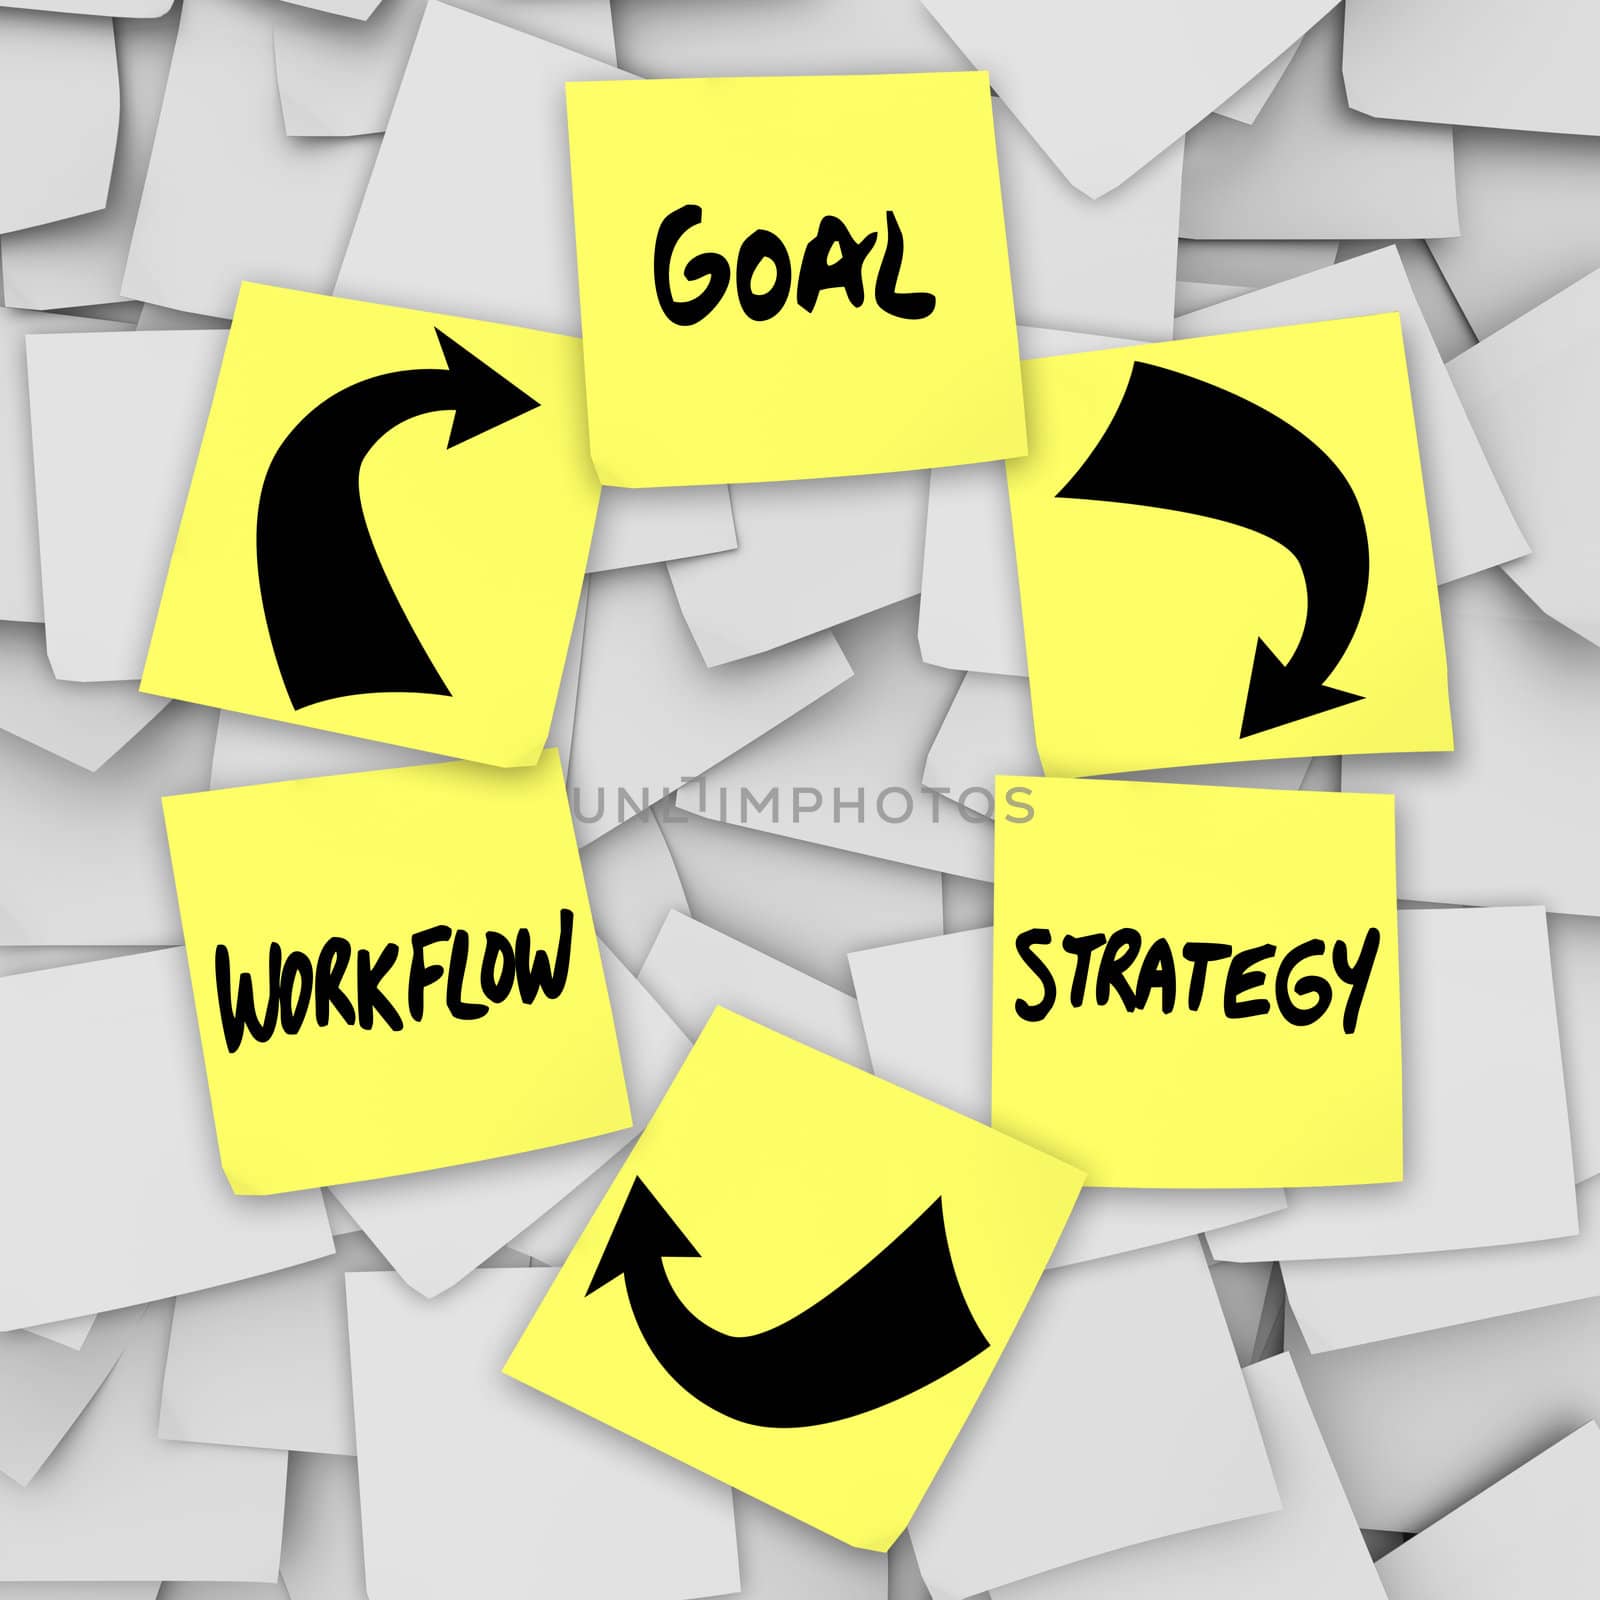 Instructions for reaching success, illustrating the steps in the process for reaching the goal including strategy and workflow